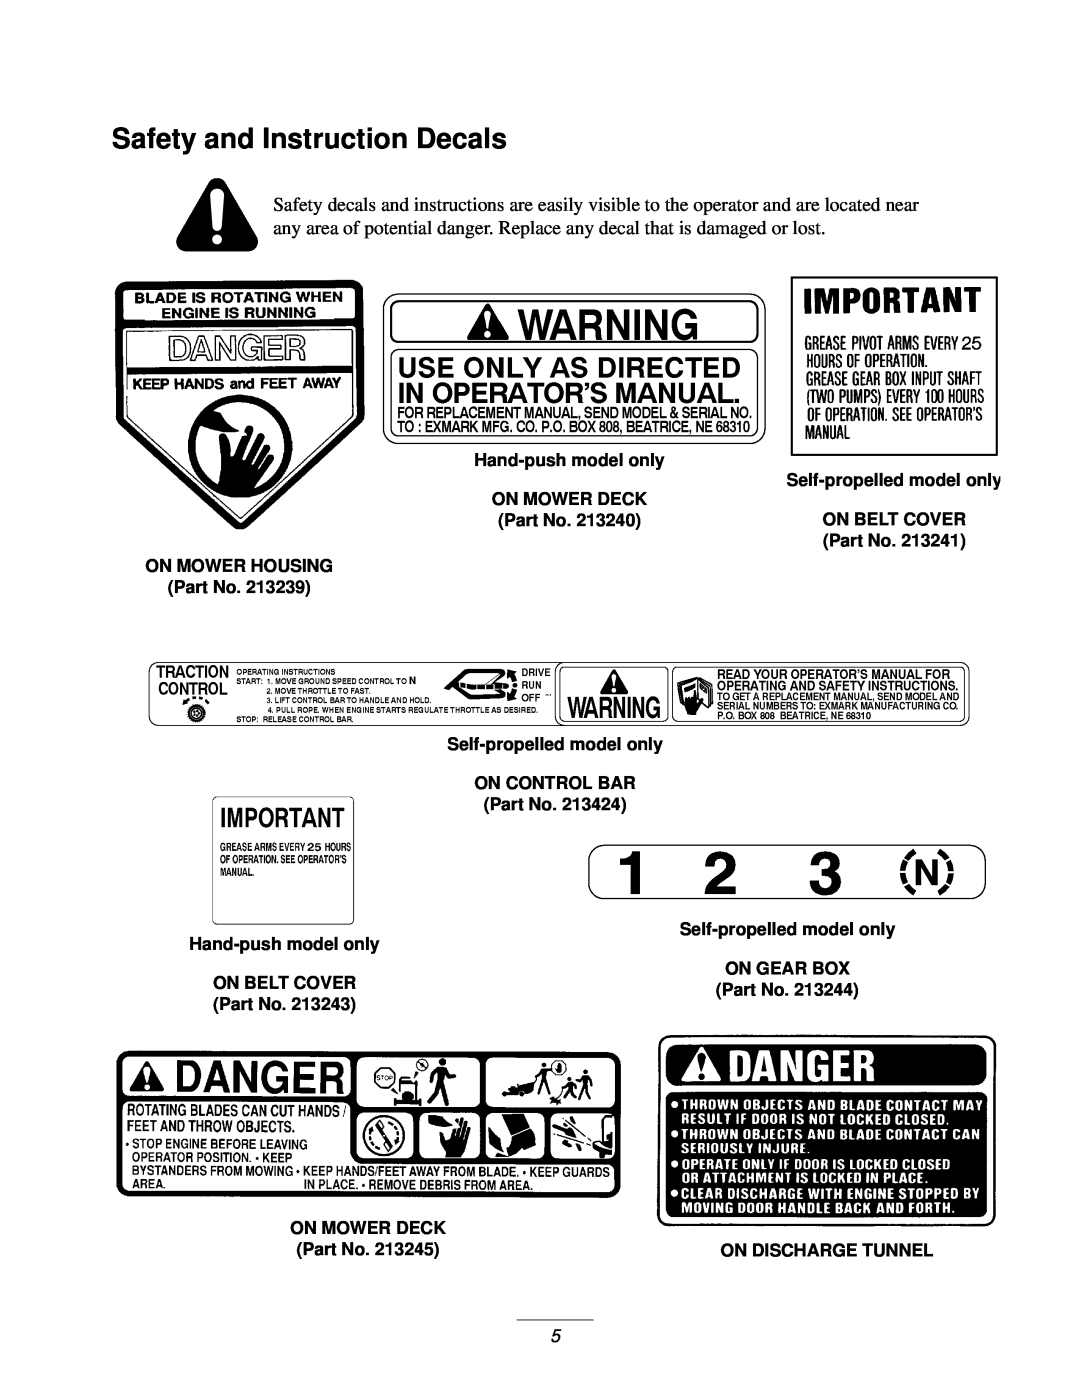 Exmark M217B, M217b, M217bsp manual Safety and Instruction Decals 